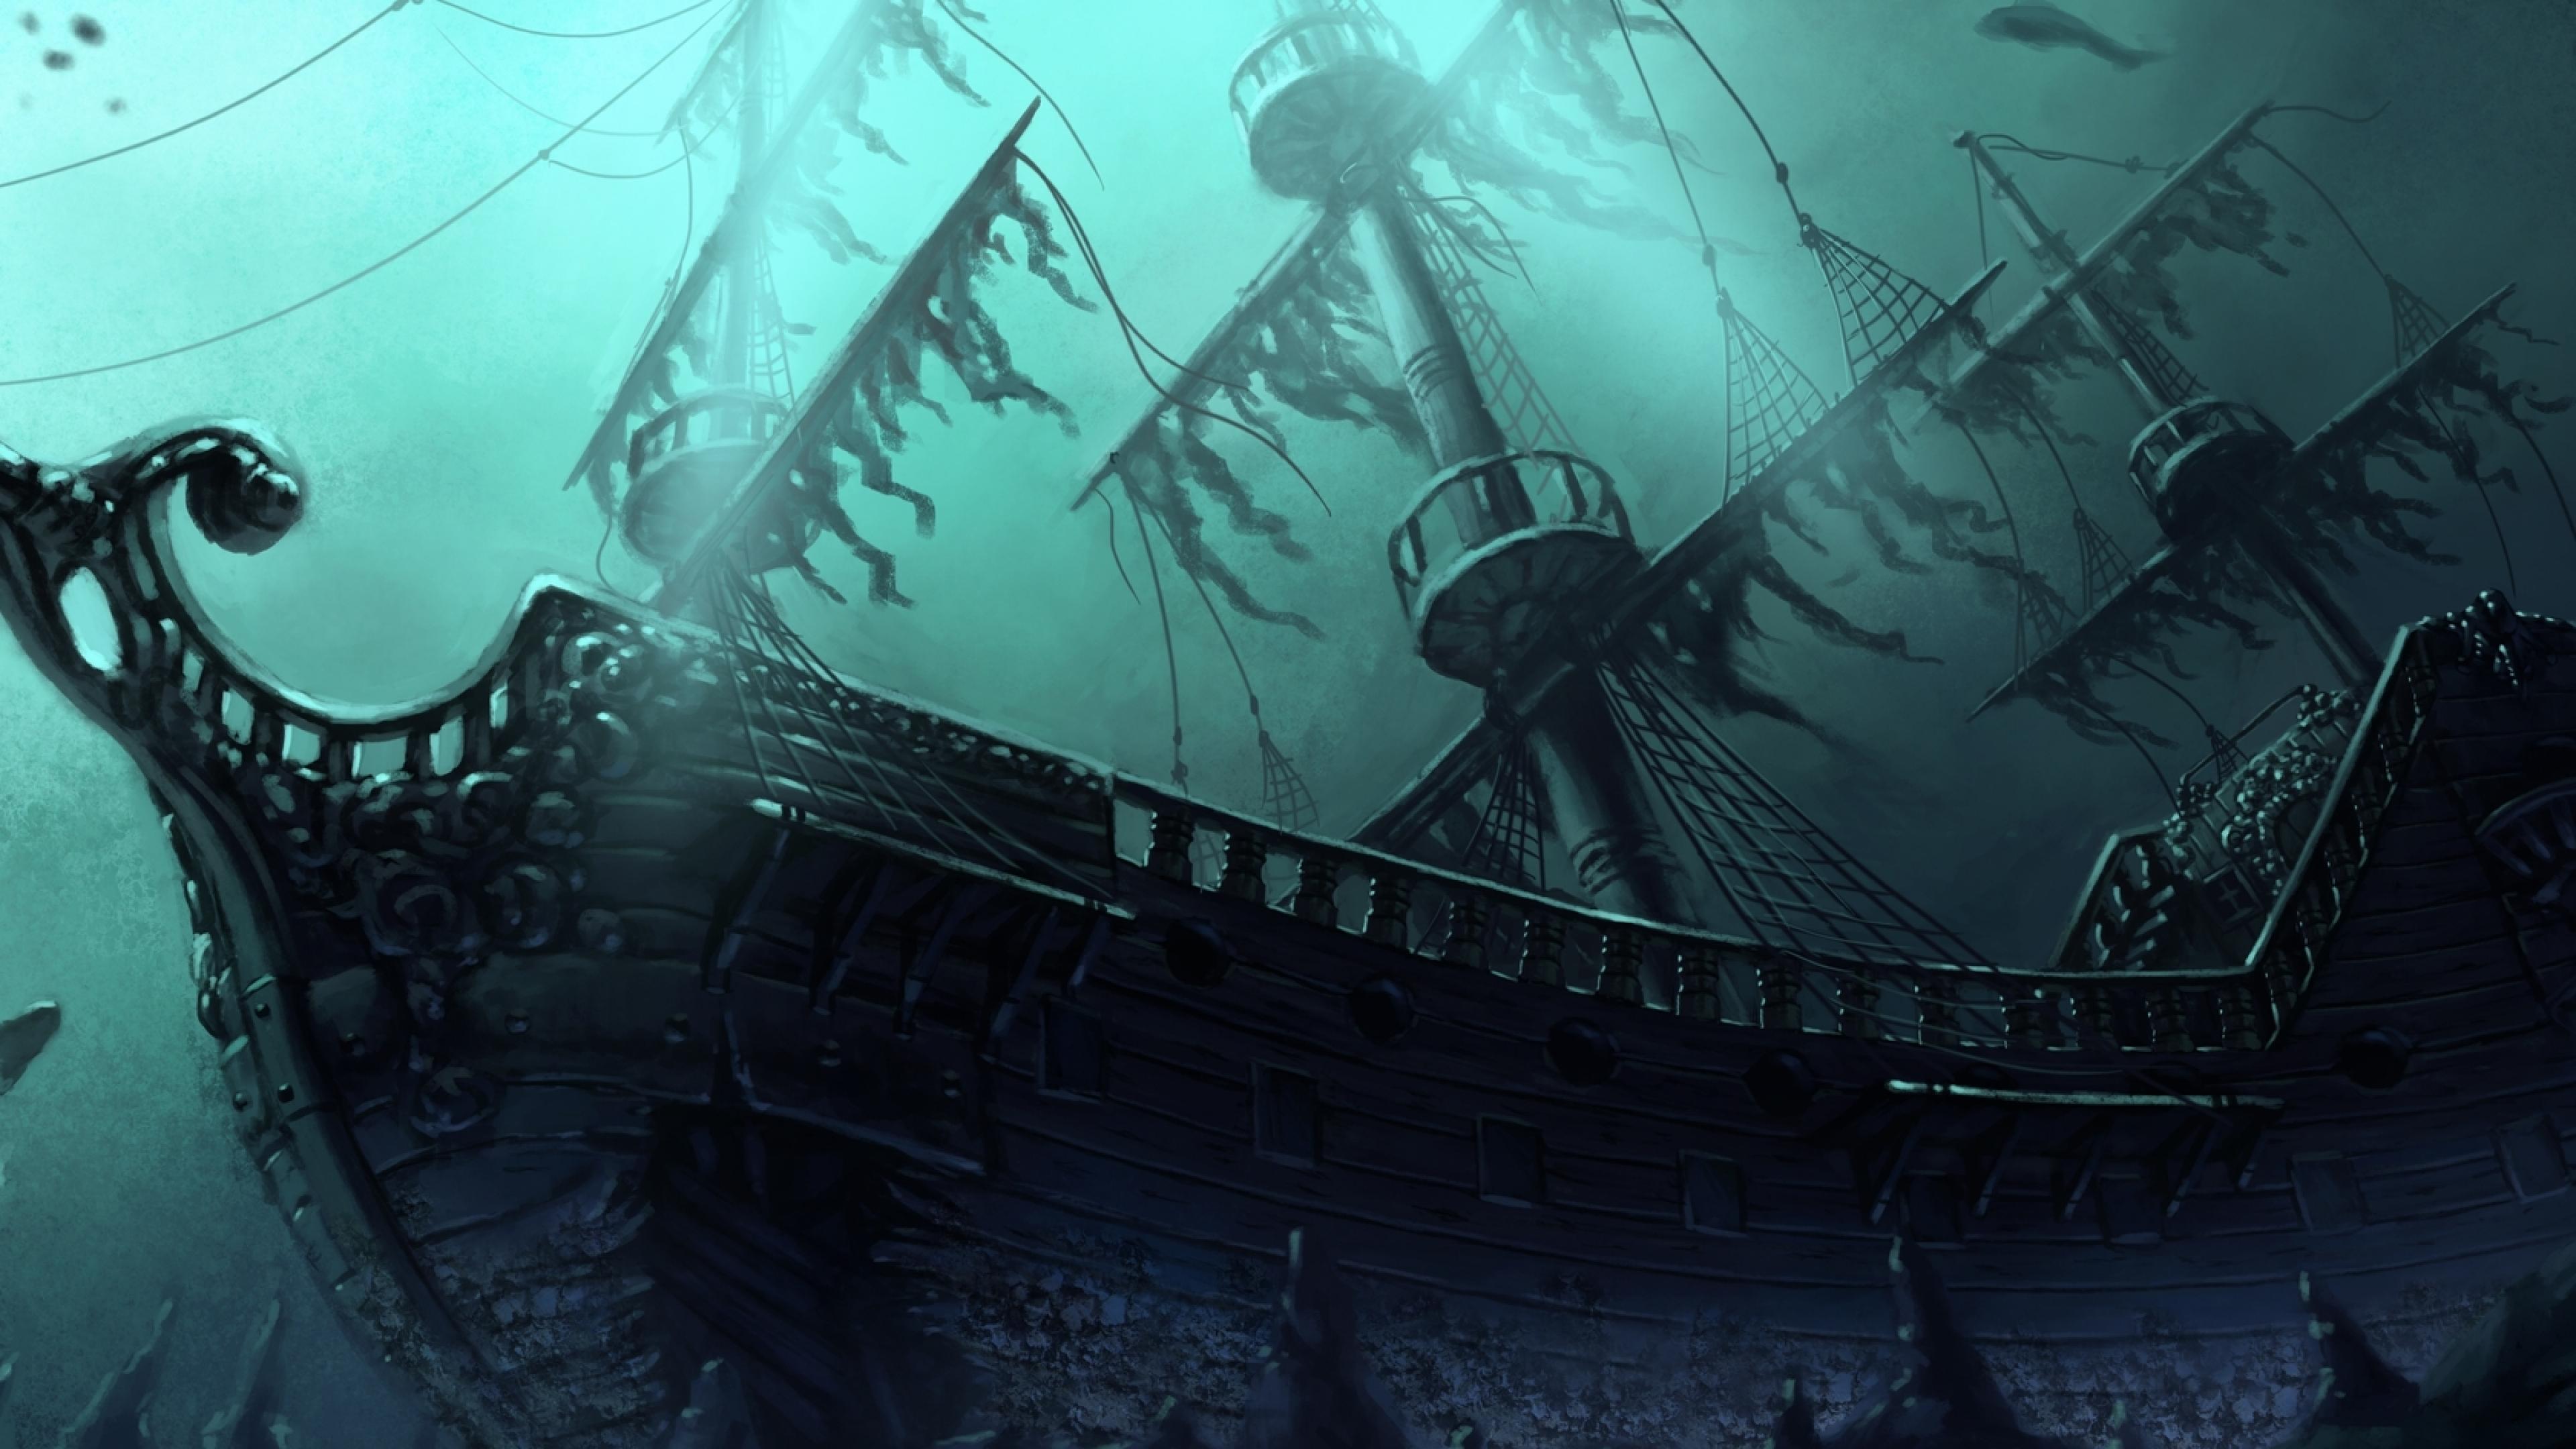 Free Ghost Pirate Ship Wallpaper High Quality Resolution « Long